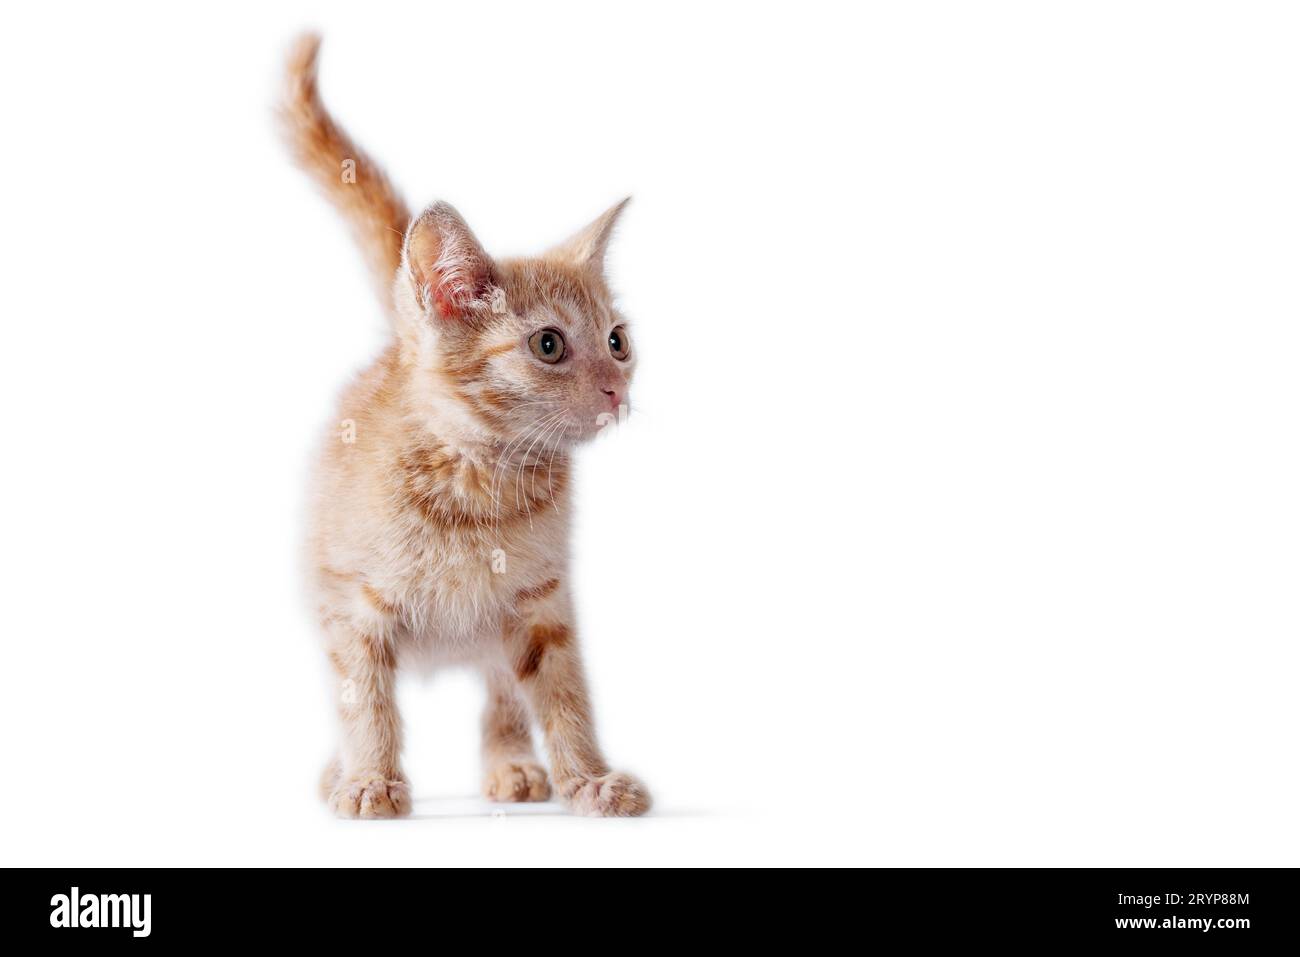 Bright red kitten standing and looking right on a white background Stock Photo